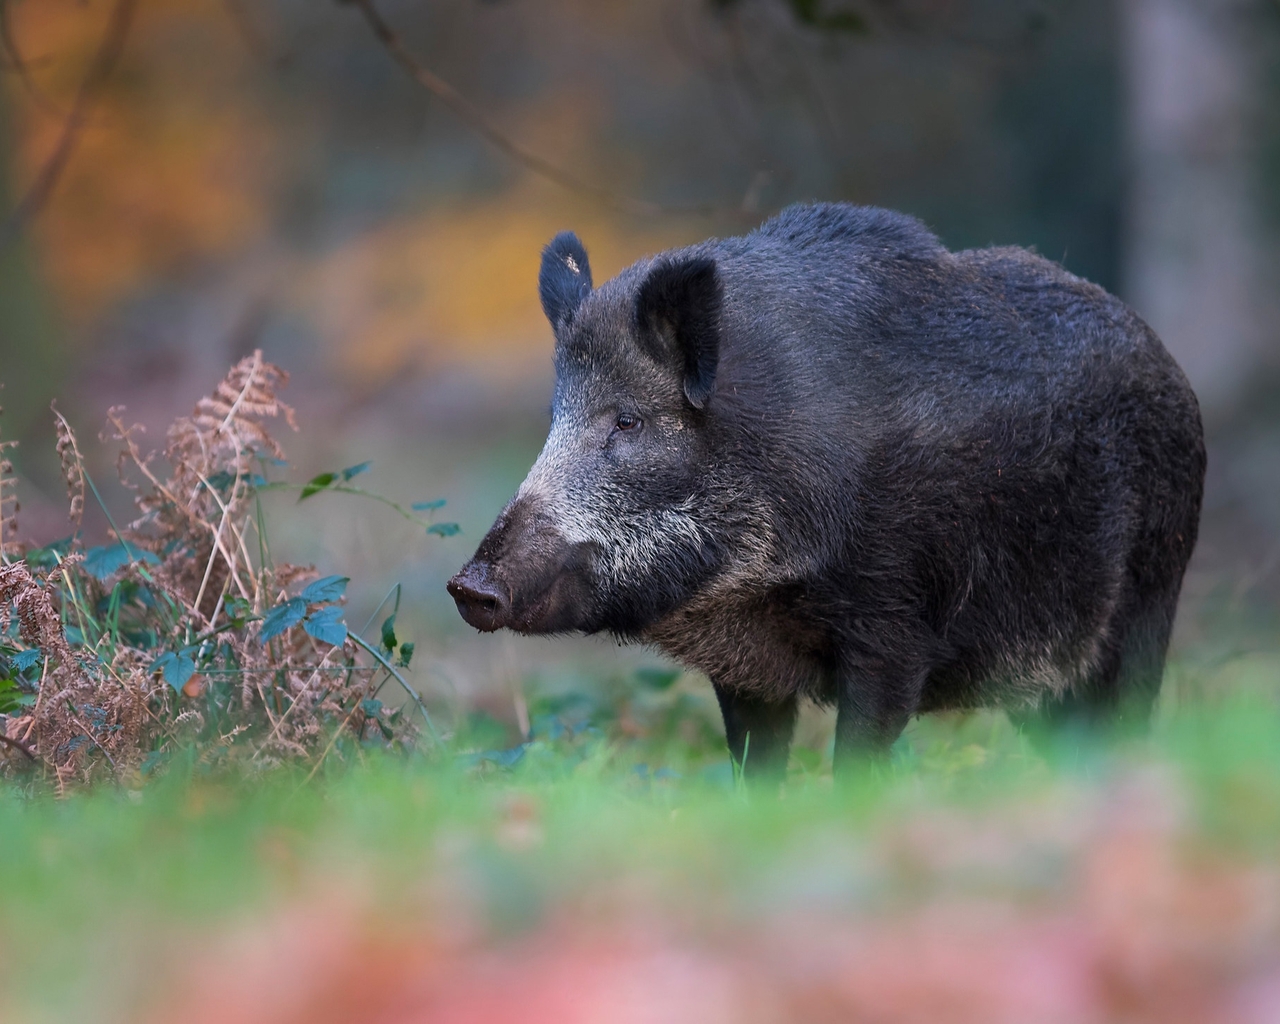 Image: Boar, muzzle, wild, forest